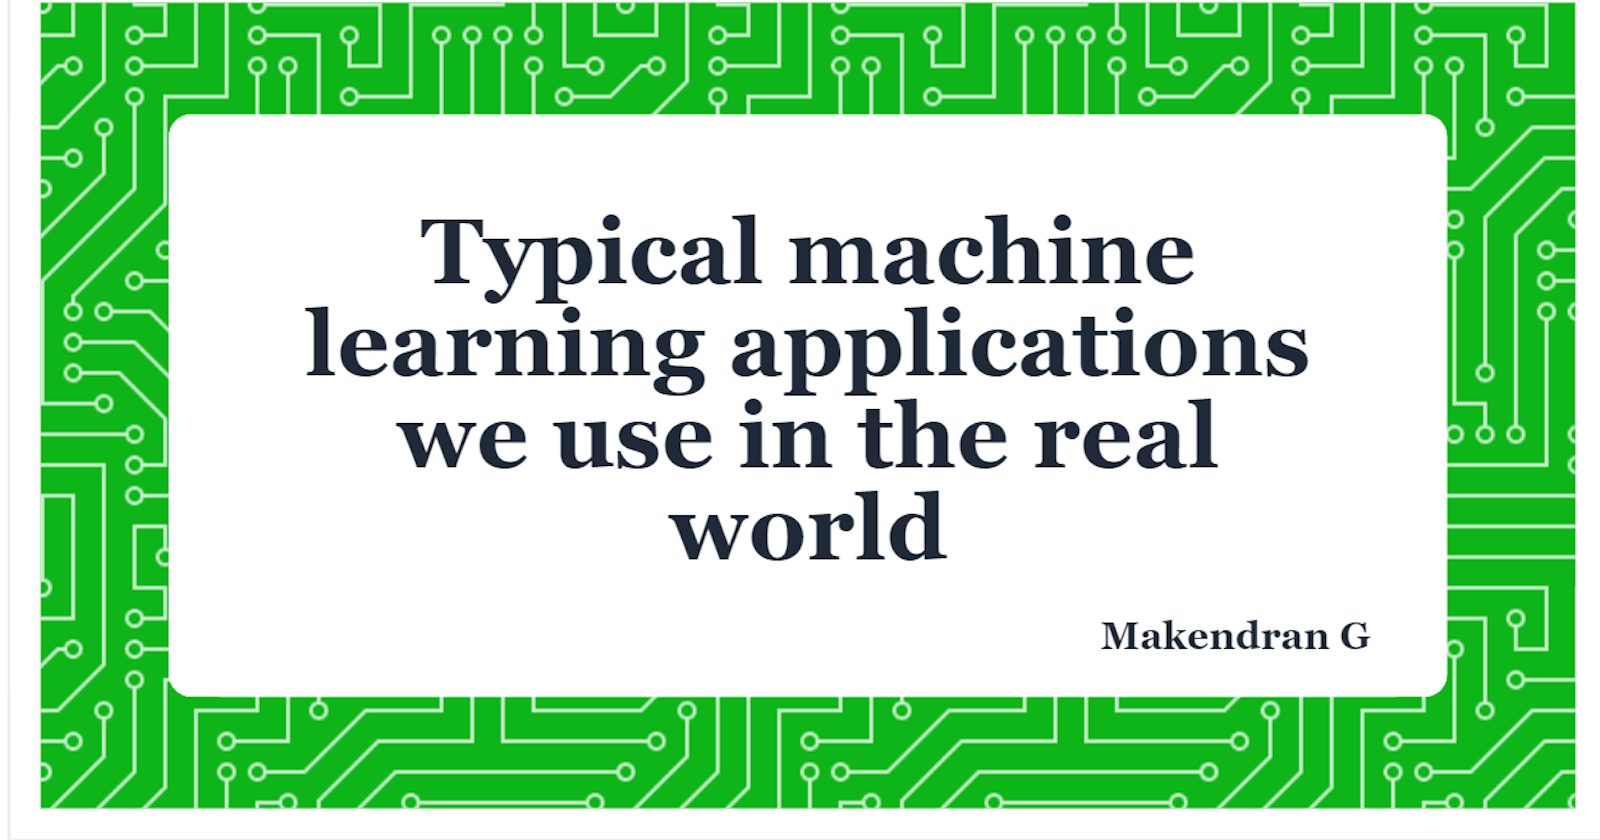 Typical machine learning applications we use in the real world